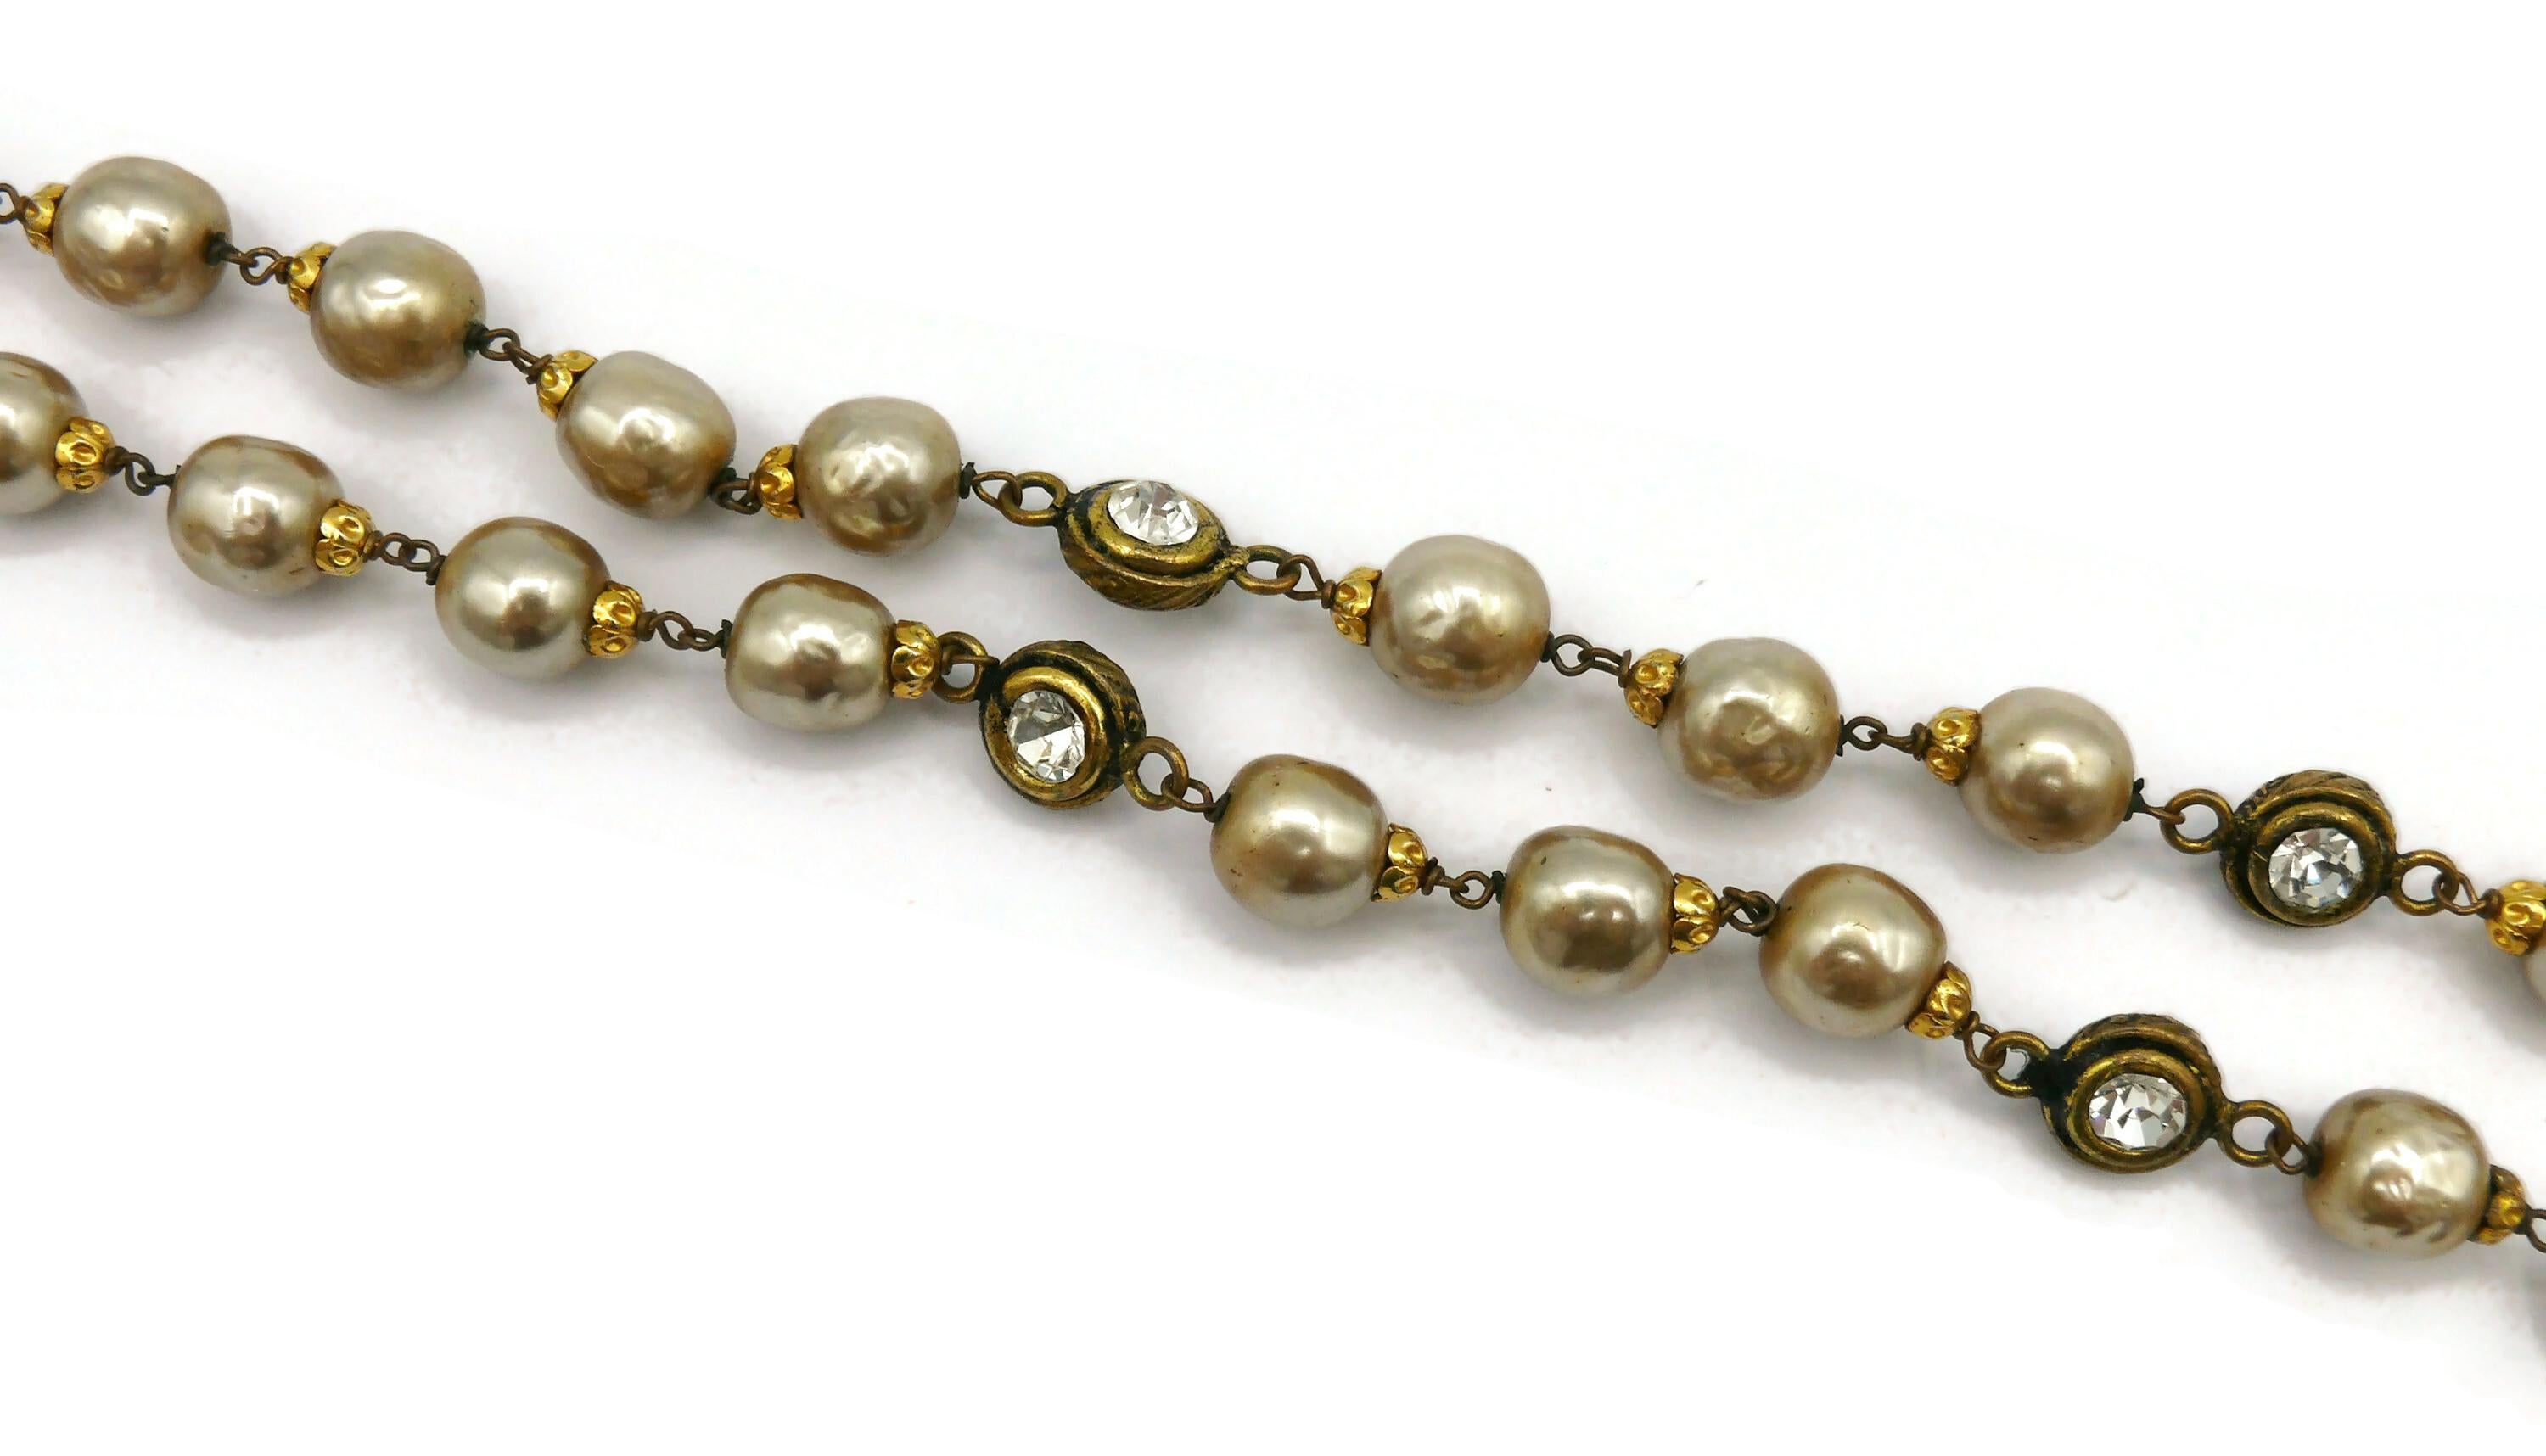 CHANEL Vintage Pearl & Crystal Sautoir Necklace, 1983 For Sale 5